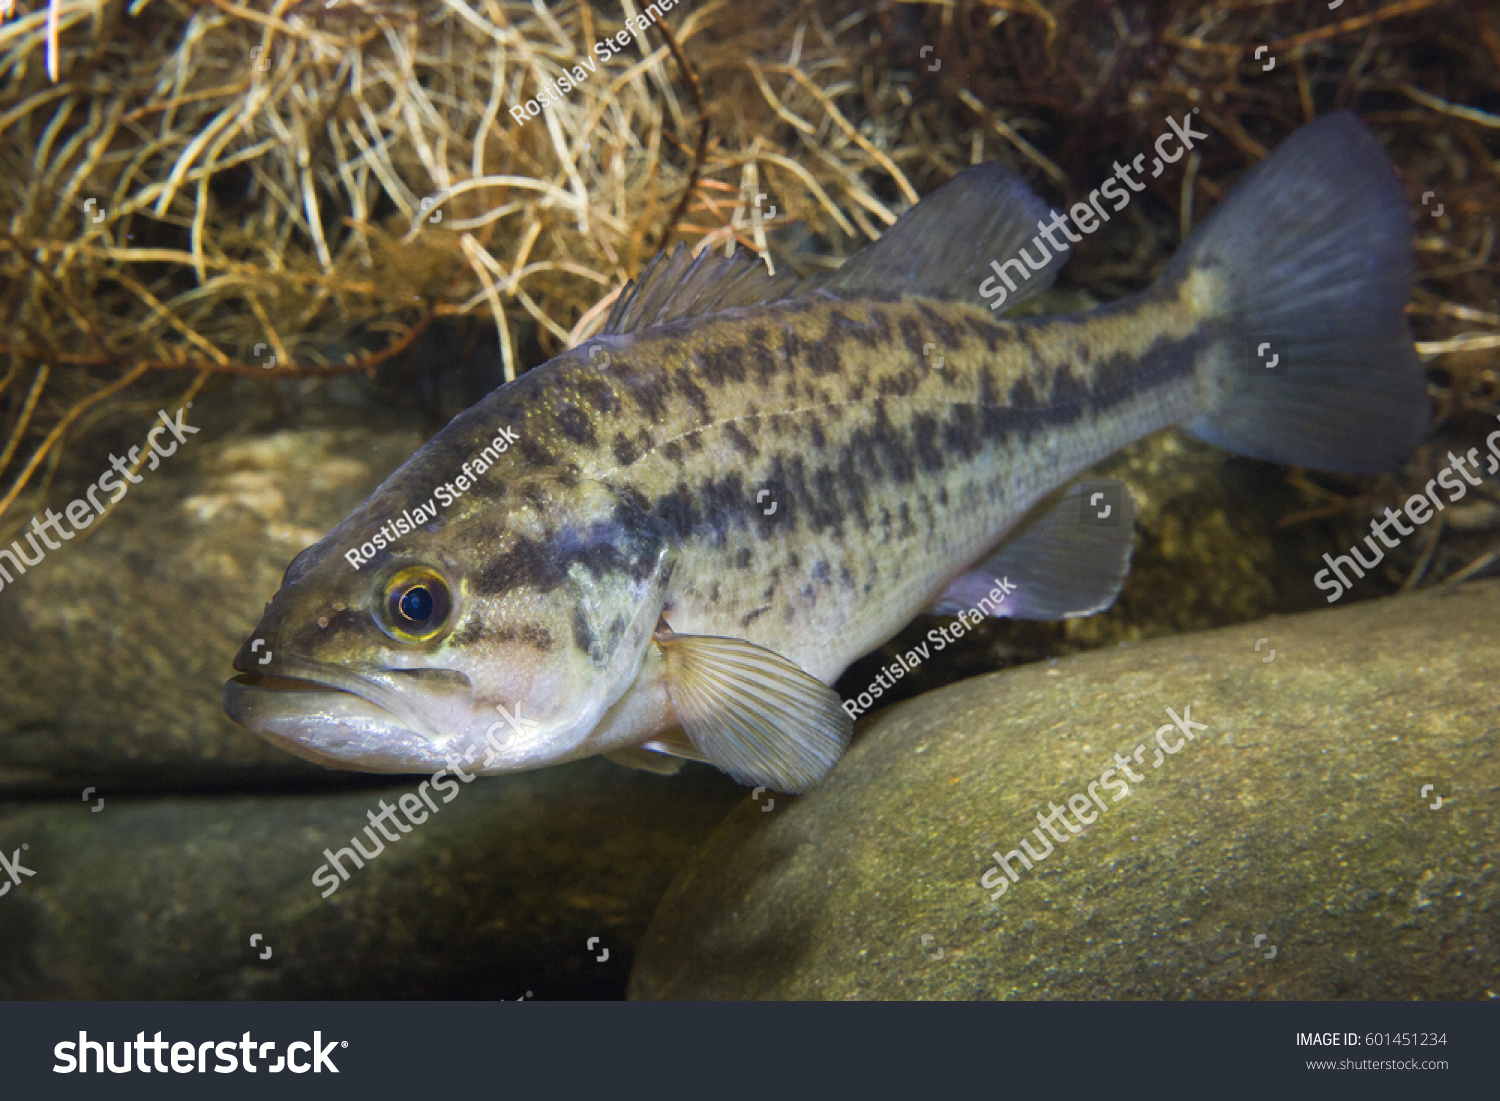 Close up underwater picture of a frash water fish Largemouth Bass (Micropterus salmoides) with a stones. Live in the lake.  #601451234